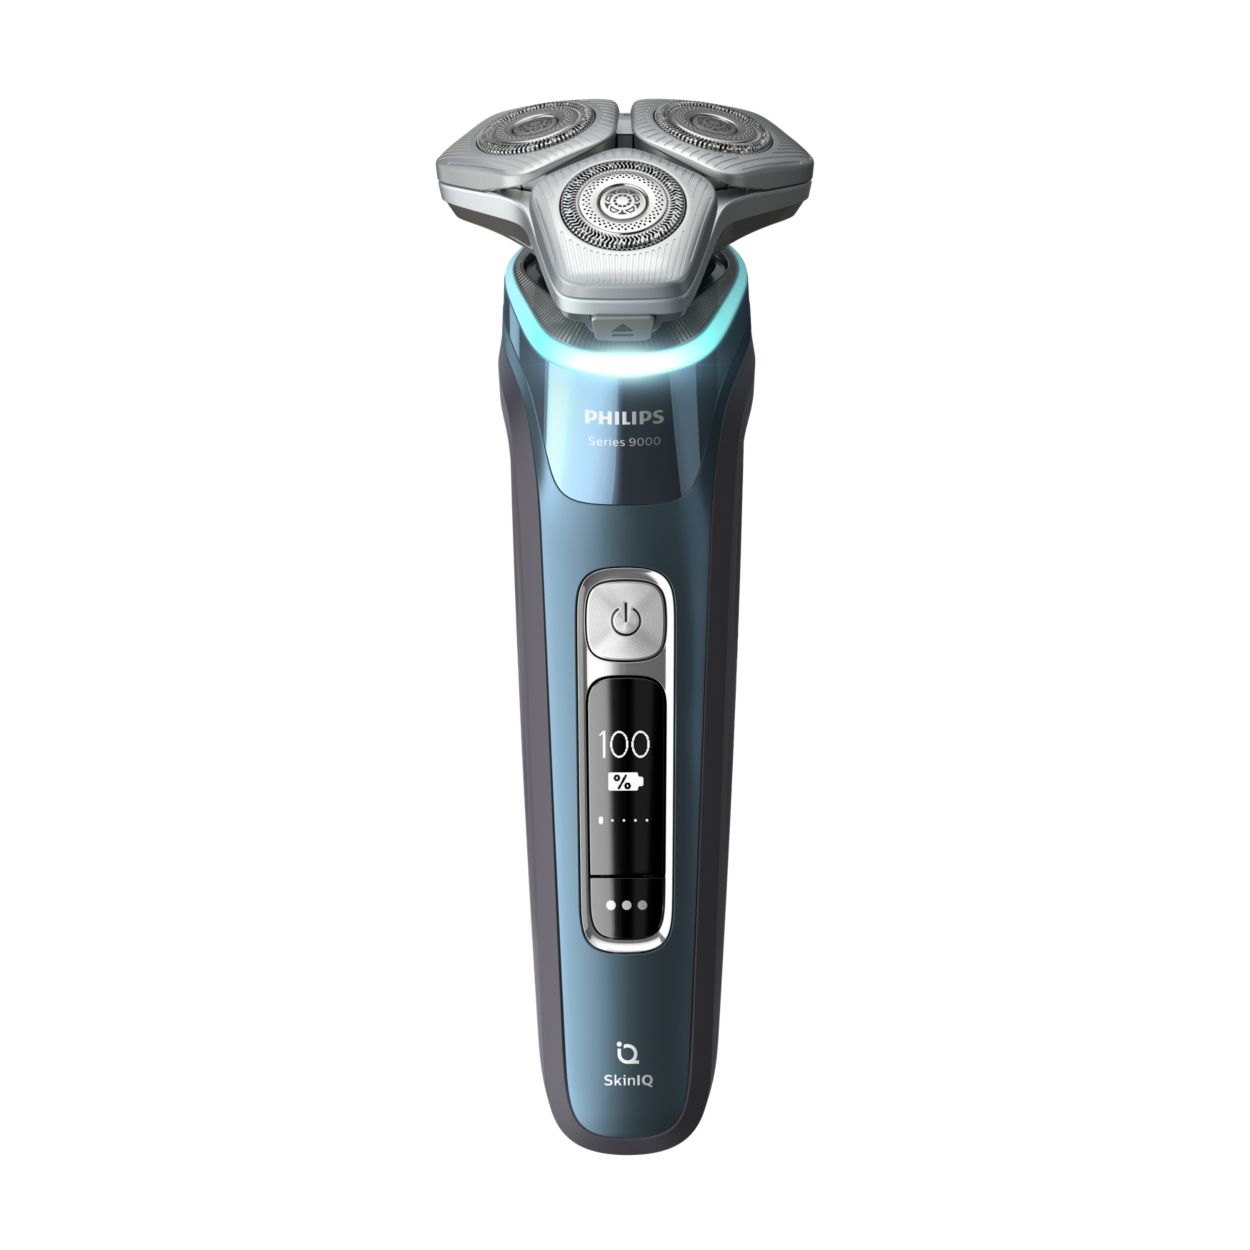 Shaver series 9000 Wet & Dry electric shaver with SkinIQ S9982/50 